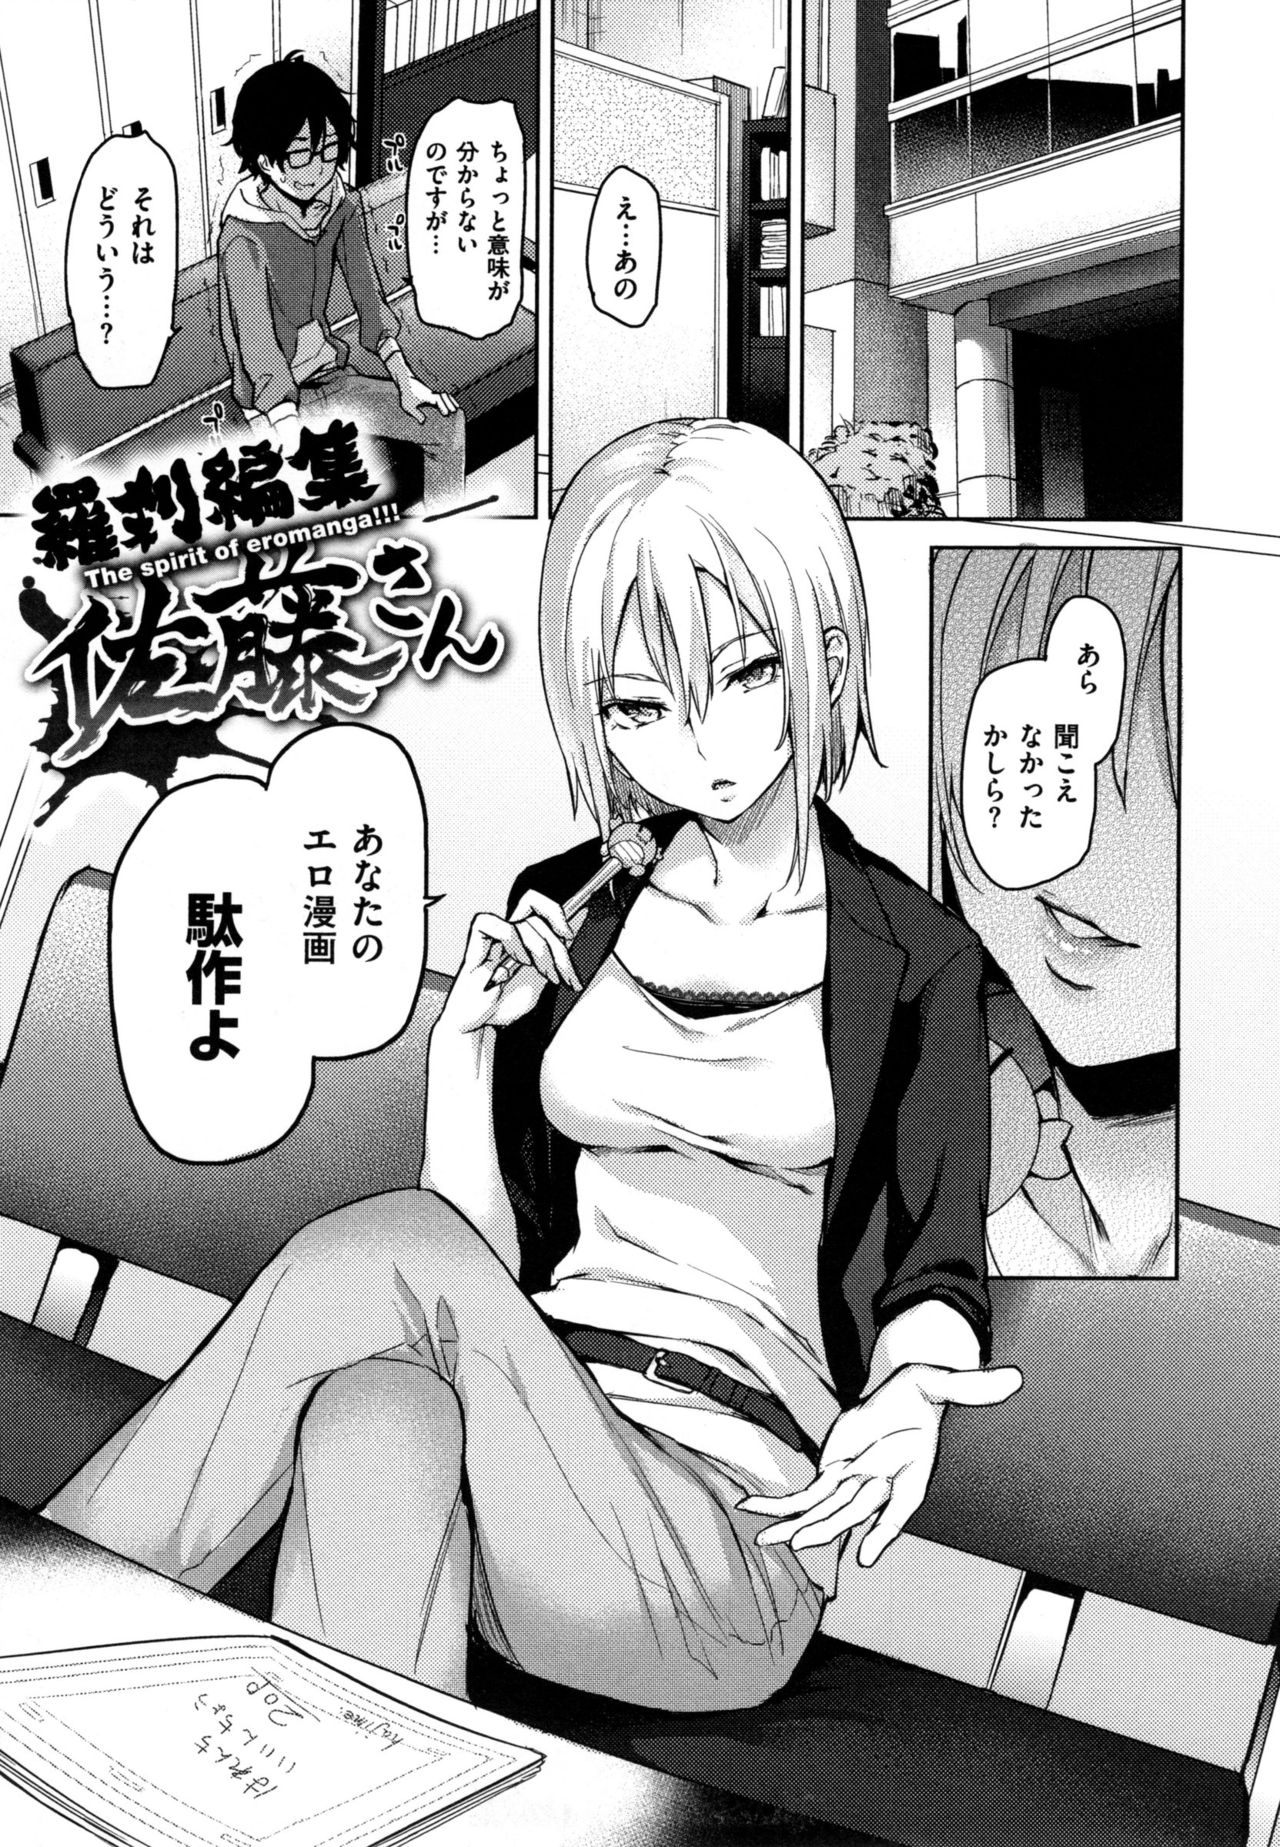 [Michiking] Shujuu Ecstasy - Sexual Relation of Master and Servant.  - page 32 full